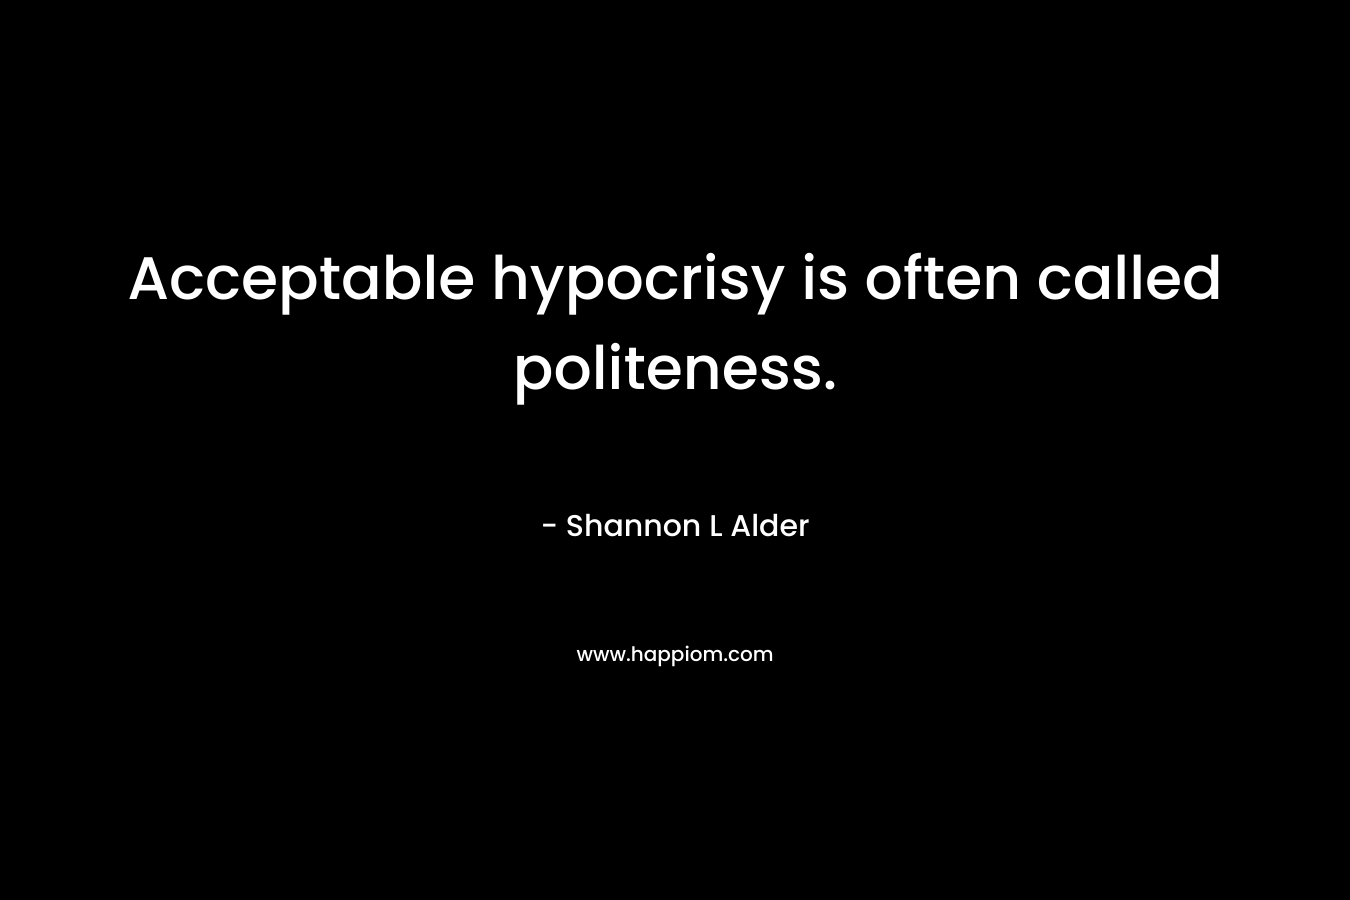 Acceptable hypocrisy is often called politeness. – Shannon L Alder